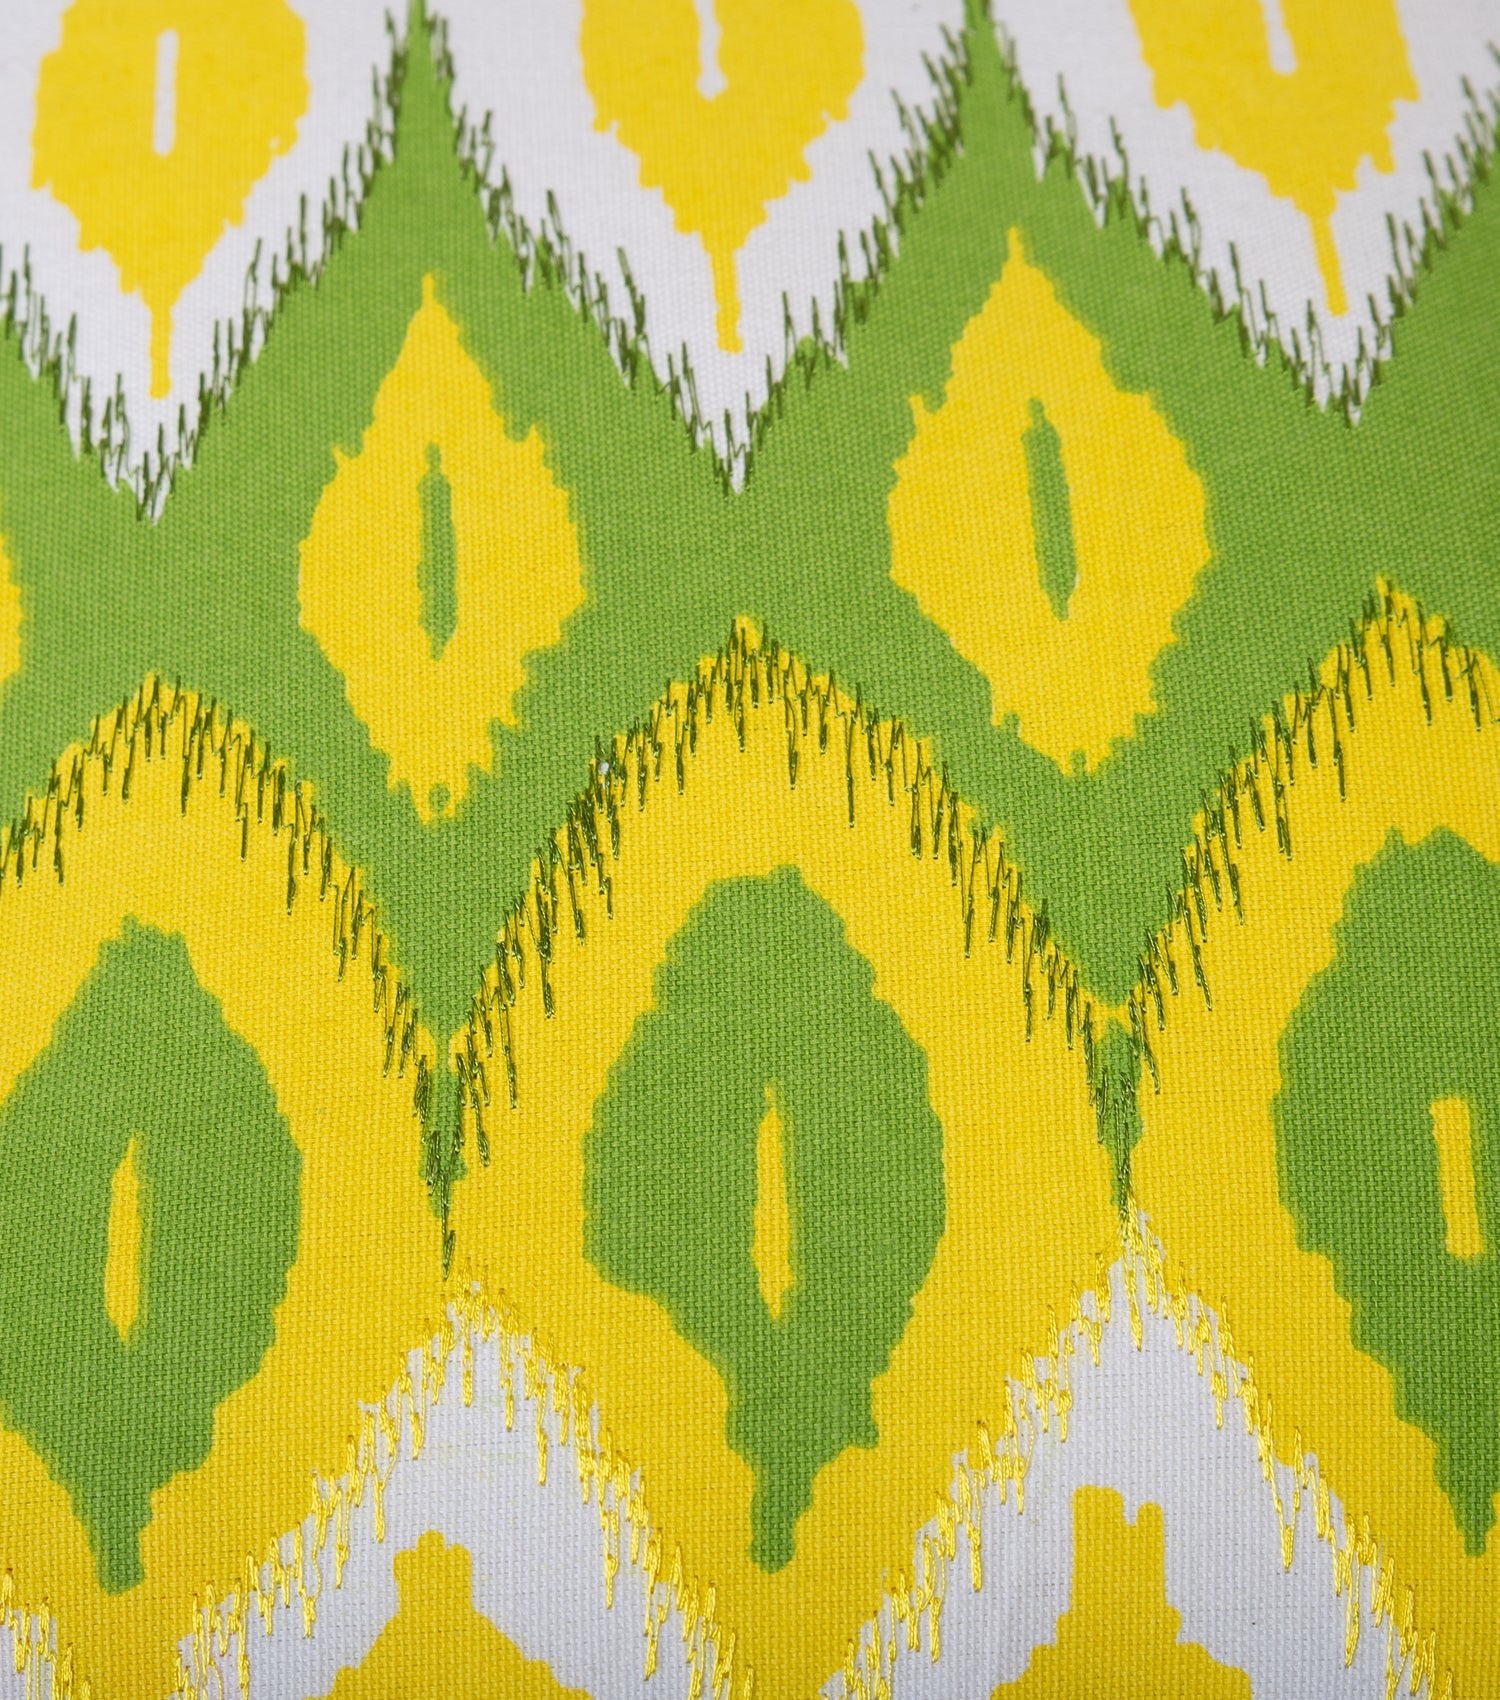 Green Yellow Printed Cotton Cushion Cover